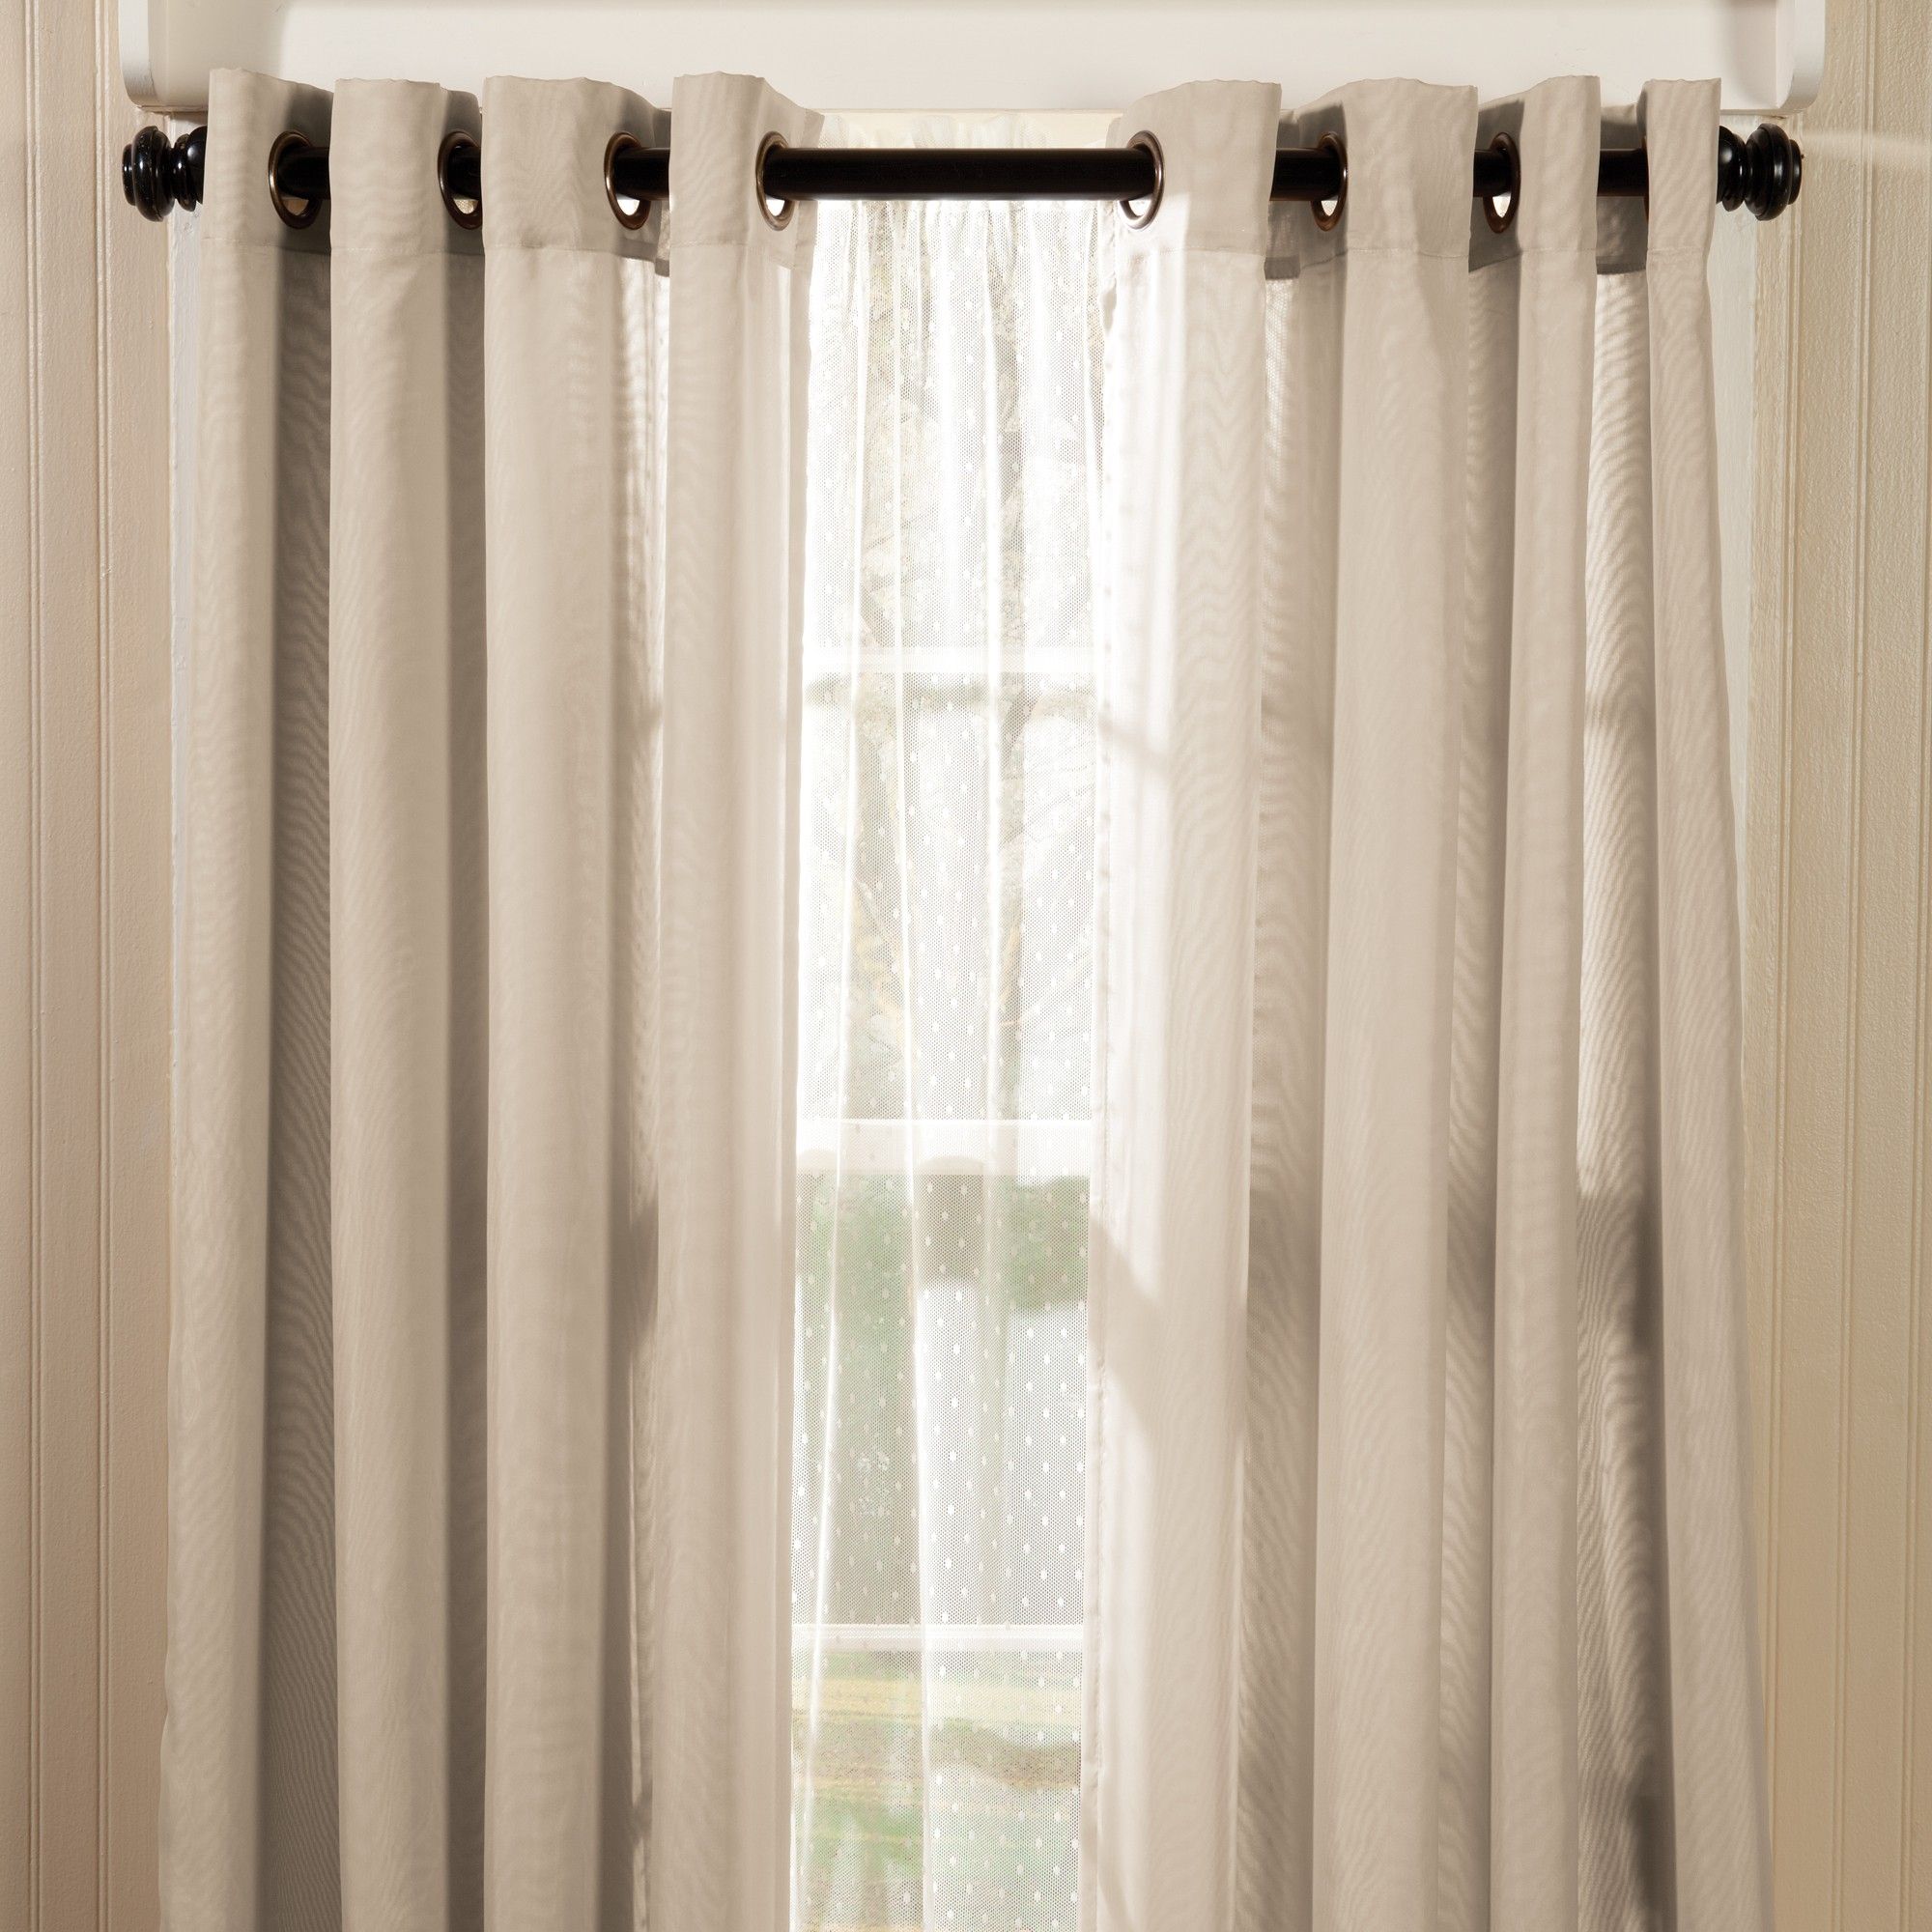 Interior Marvellous Curtain Sheers With Cute Color For Window Inside Curtains Sheers (View 11 of 25)